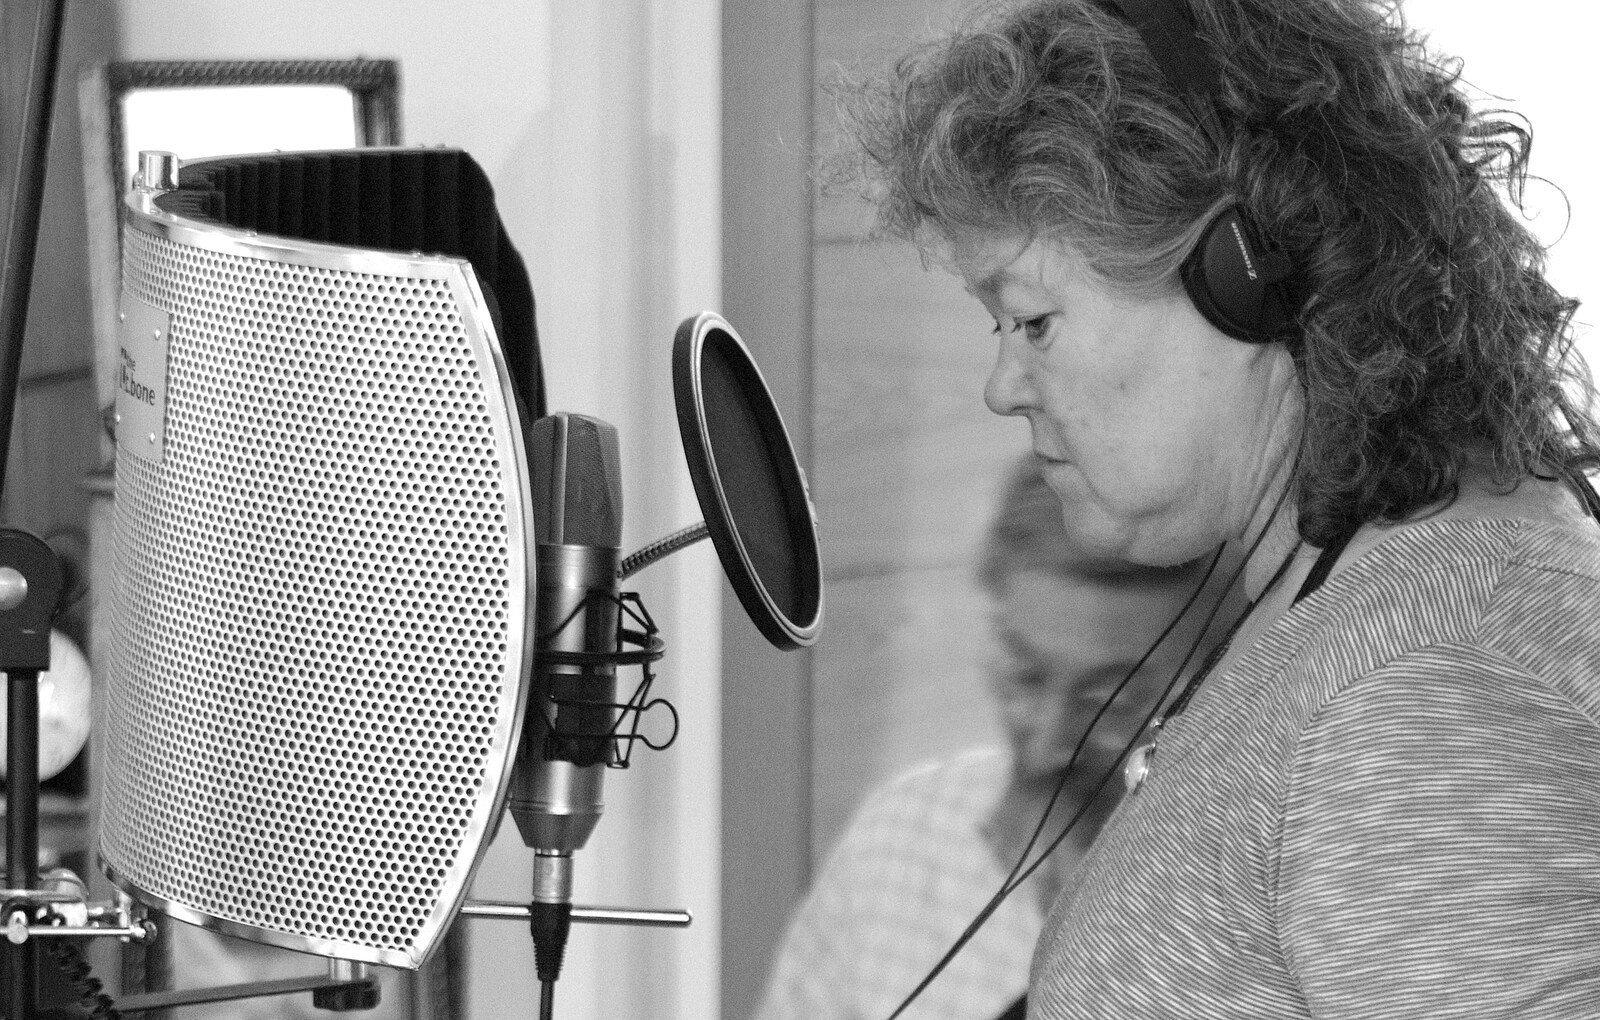 Jo ponders some singing from The BBs do a Recording, Hethel, Norfolk - 18th January 2015